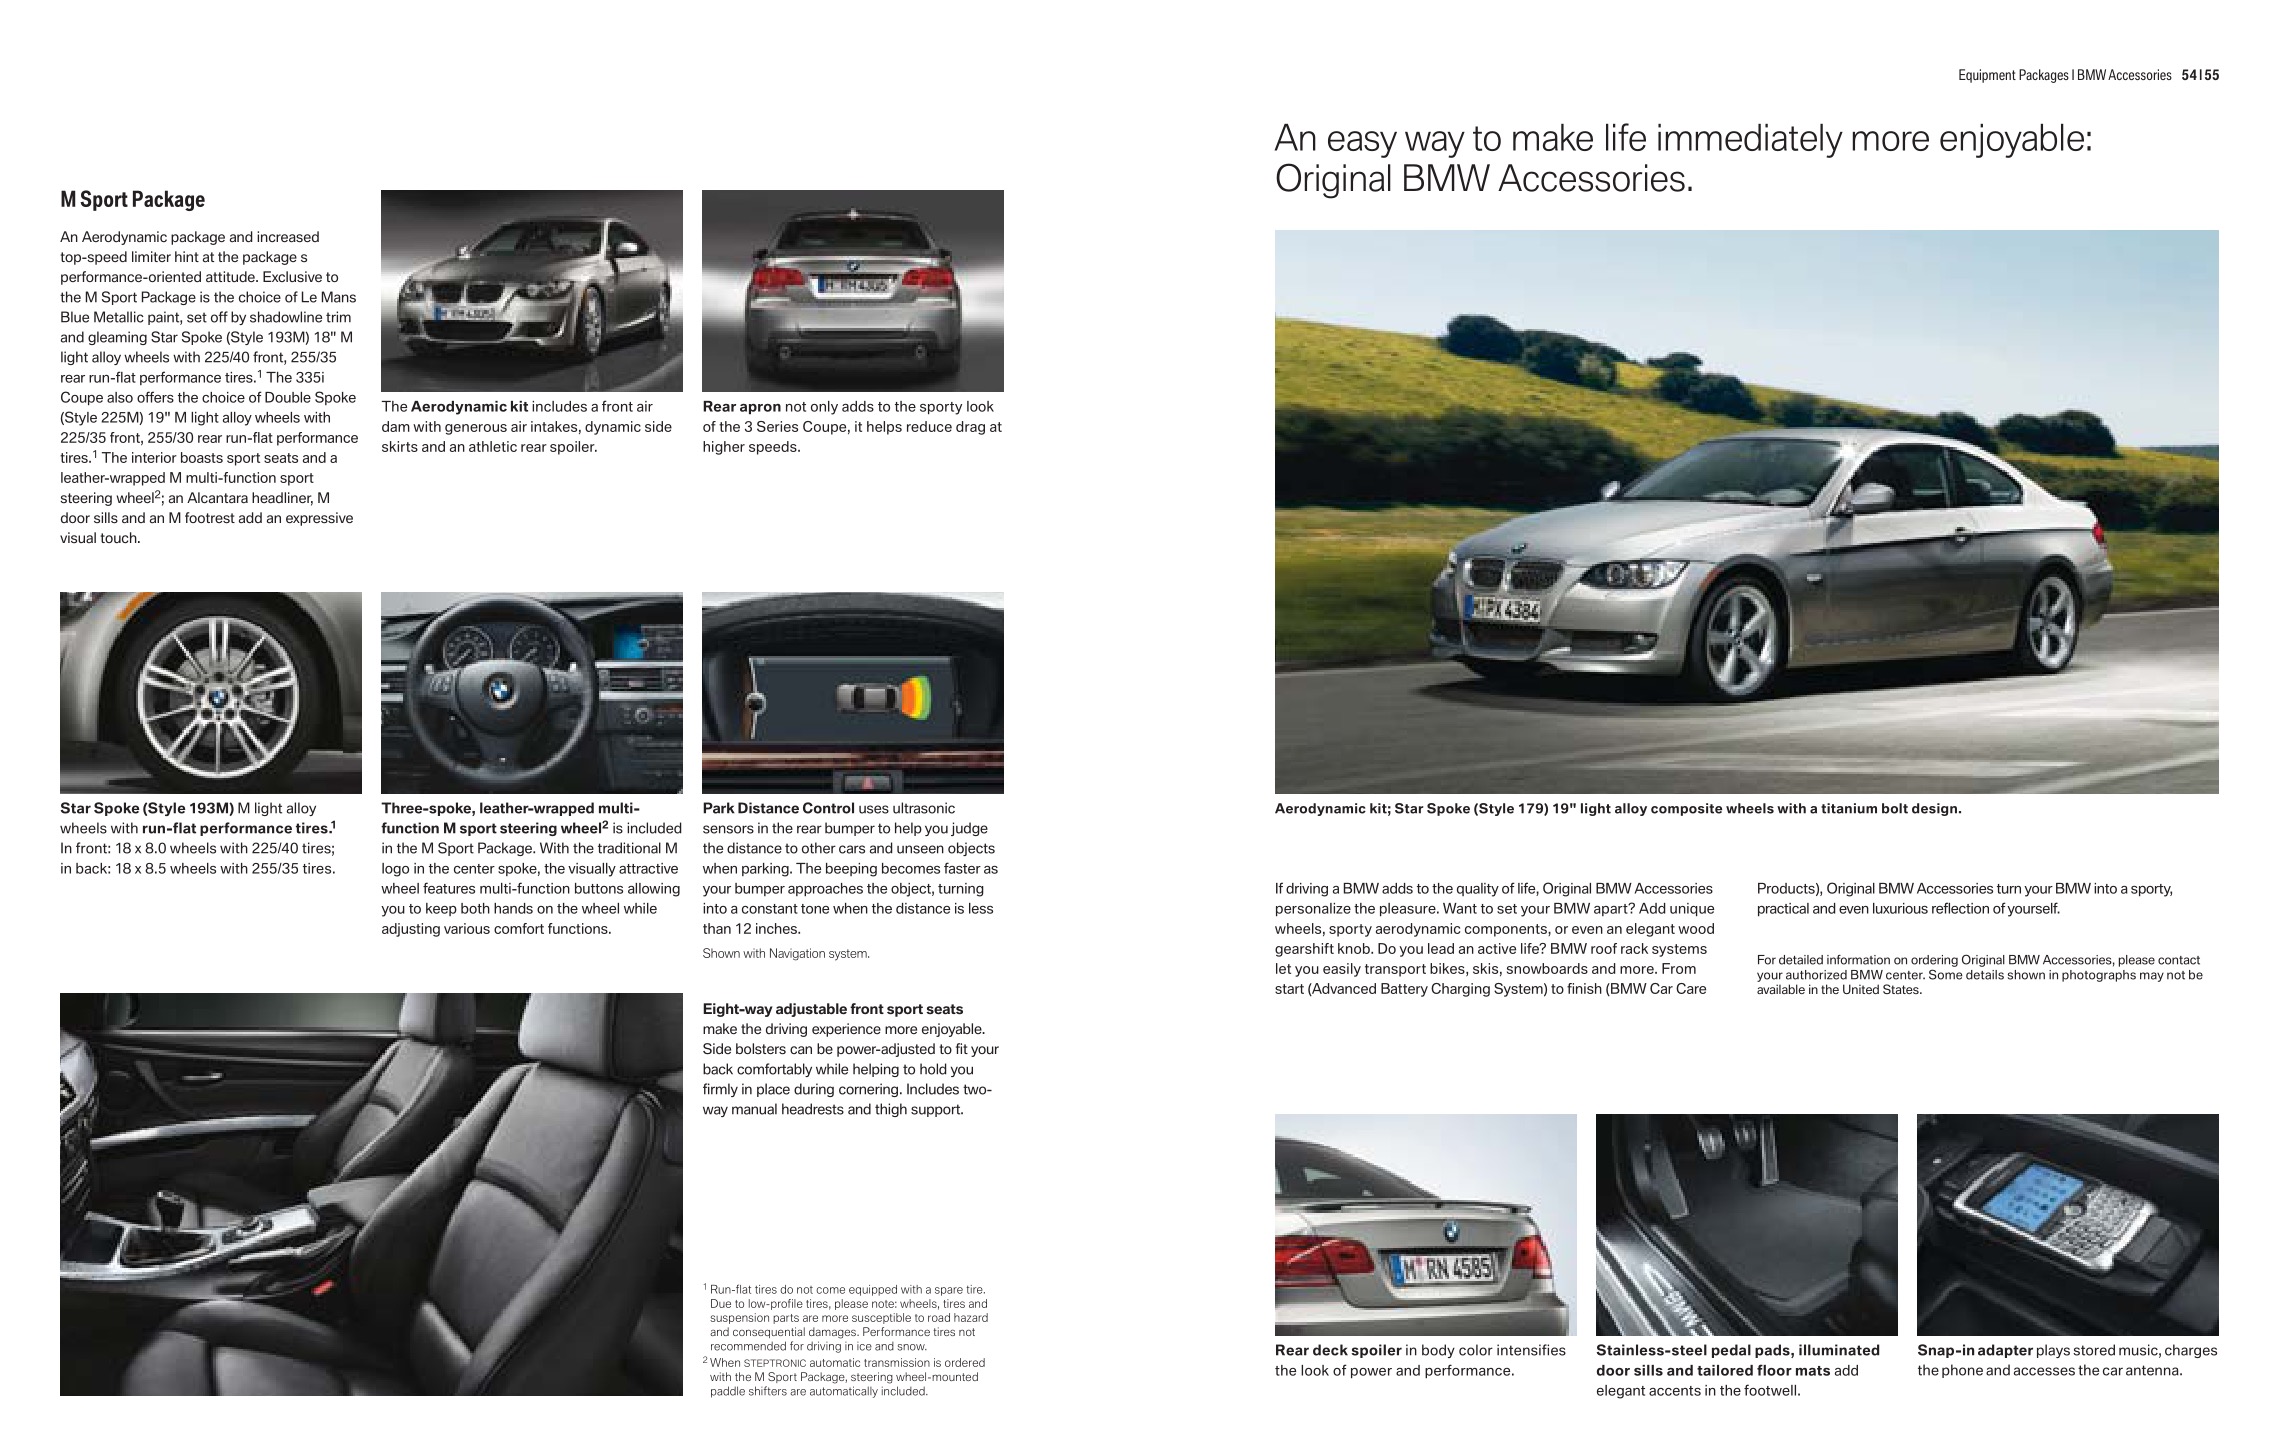 2010 BMW 3-Series Coupe Brochure Page 24